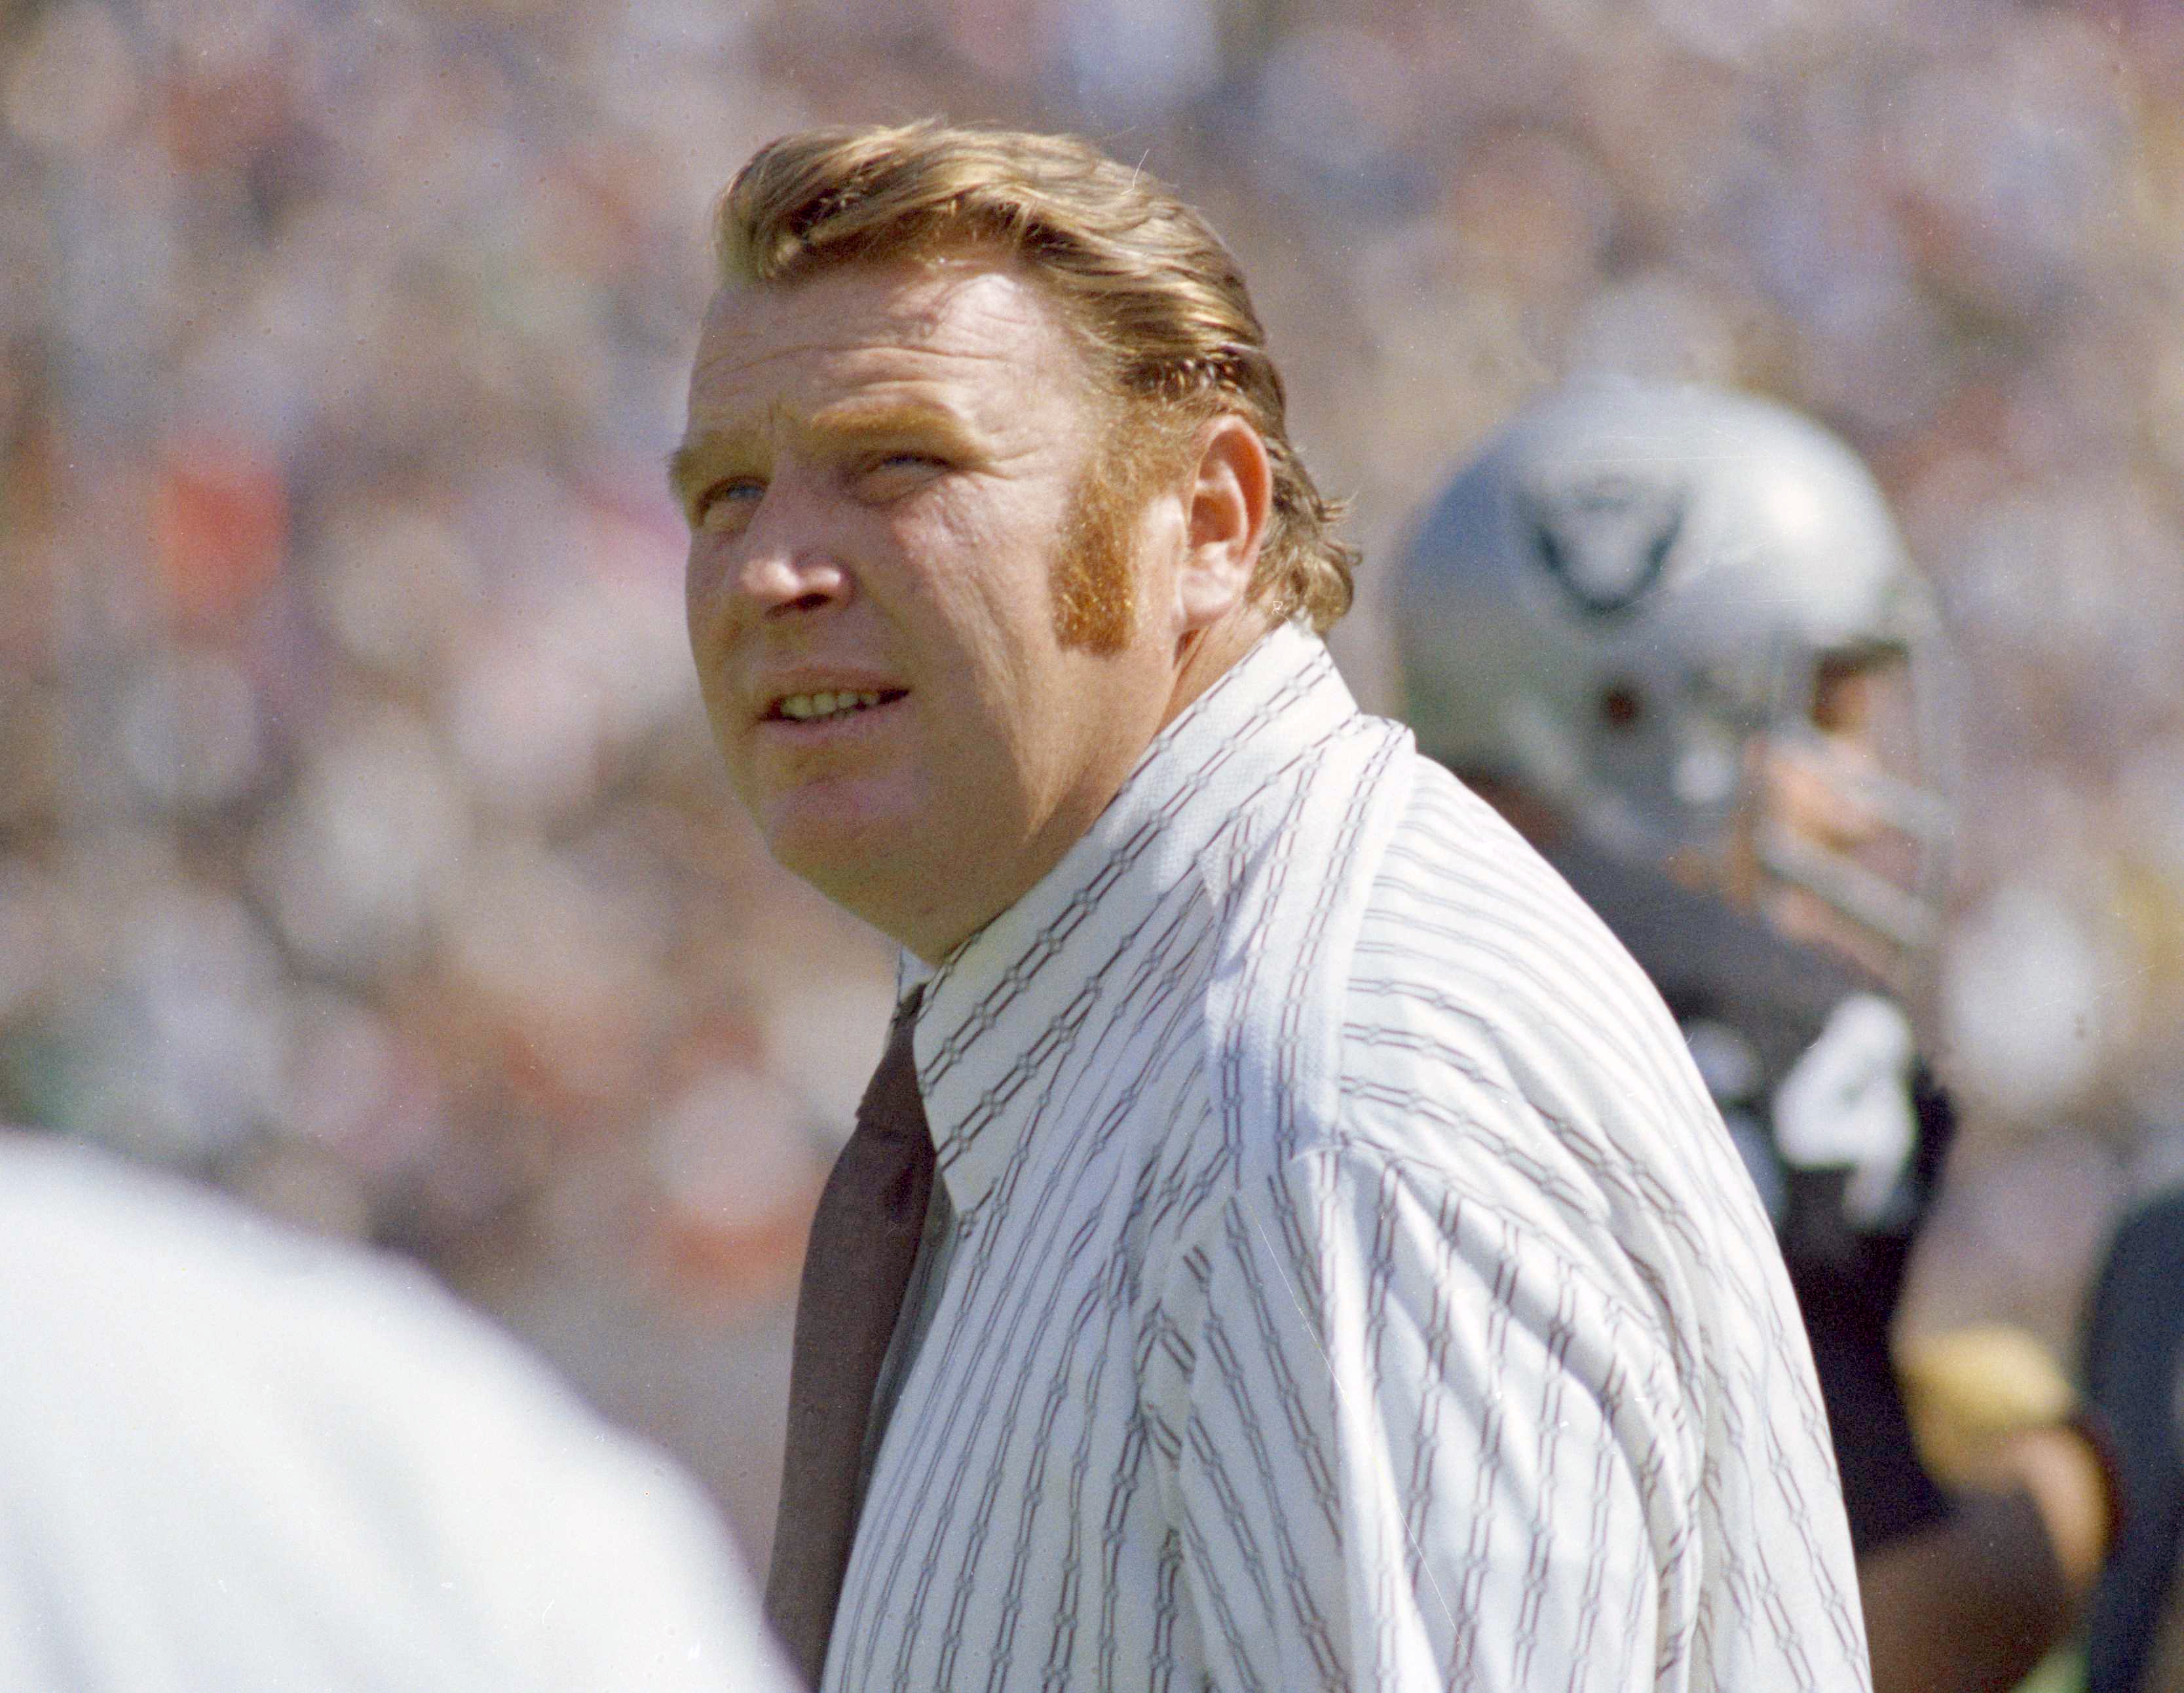 John Madden, Legendary NFL Coach and Broadcaster, Dies at Age 85